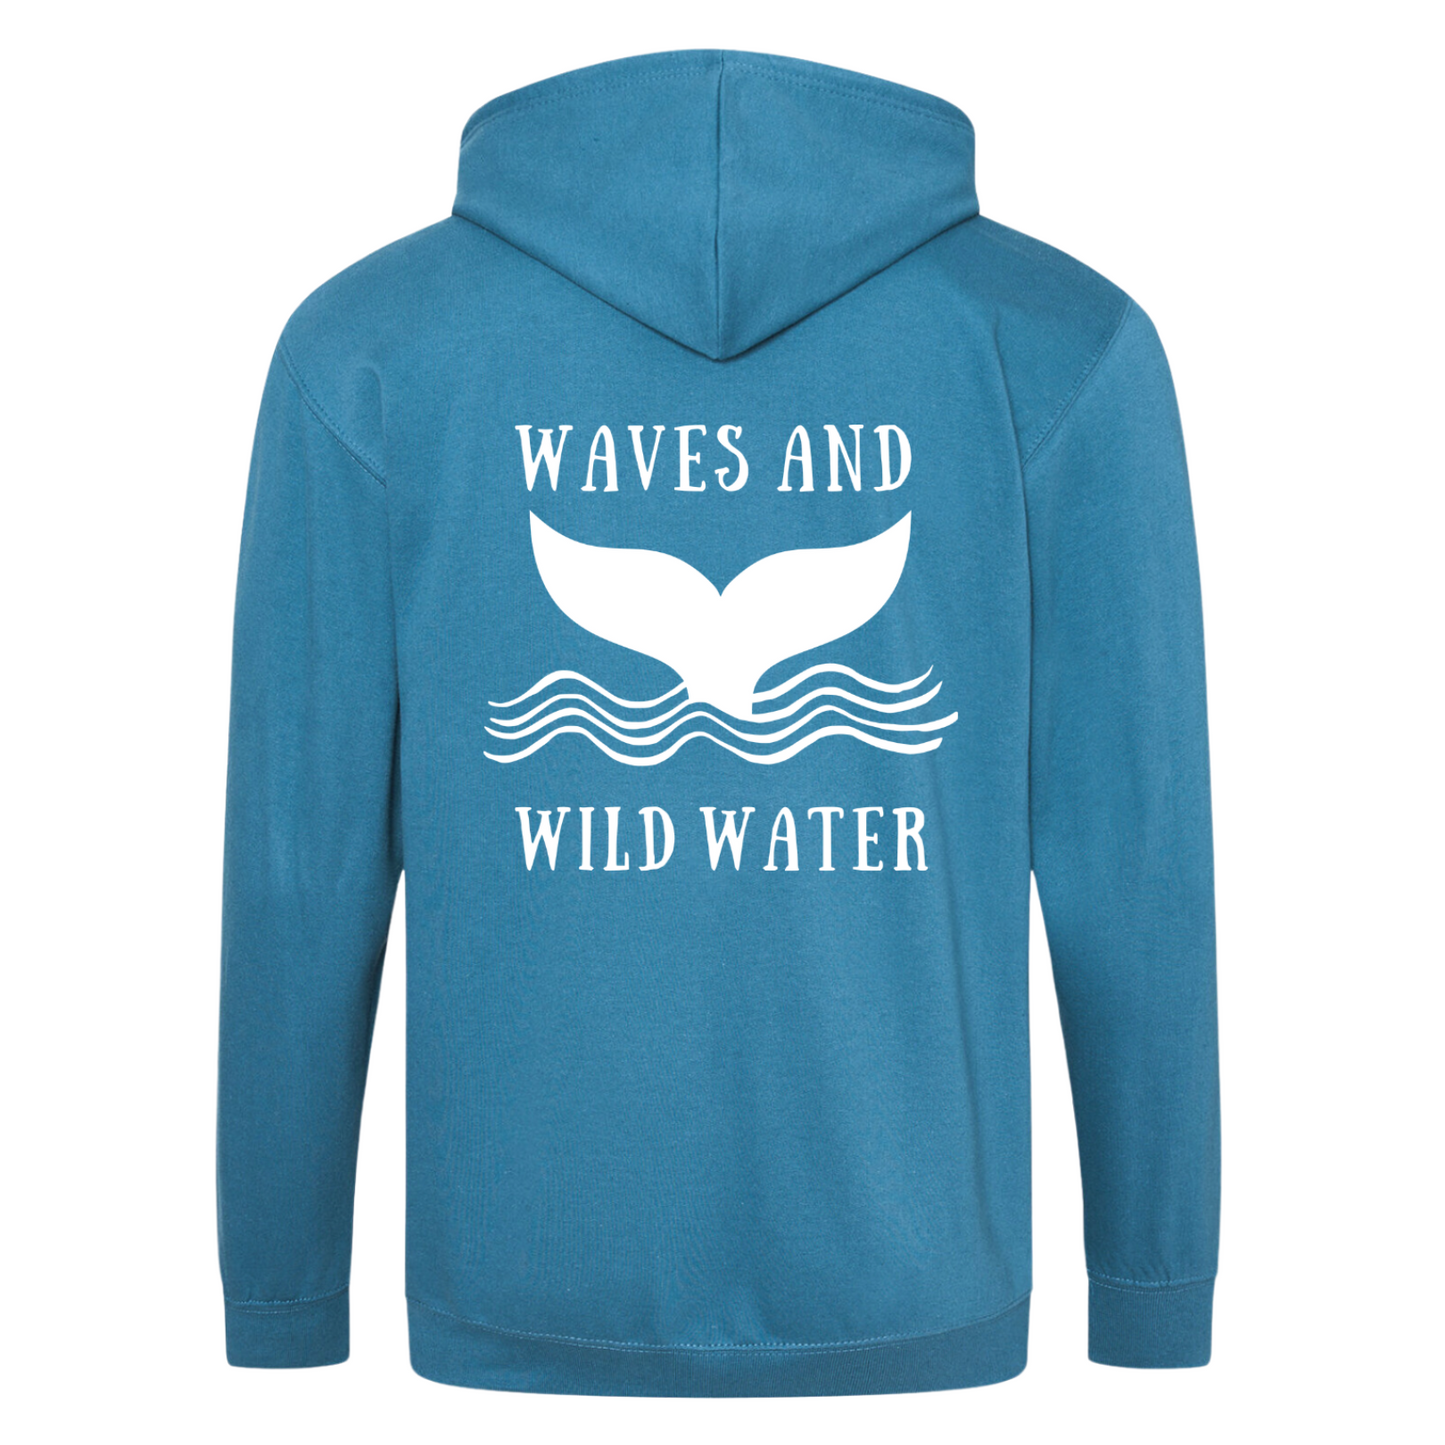 A tropical blue hoodie with a white Waves & Wild Water logo, depicting a whale tail coming out of the water.